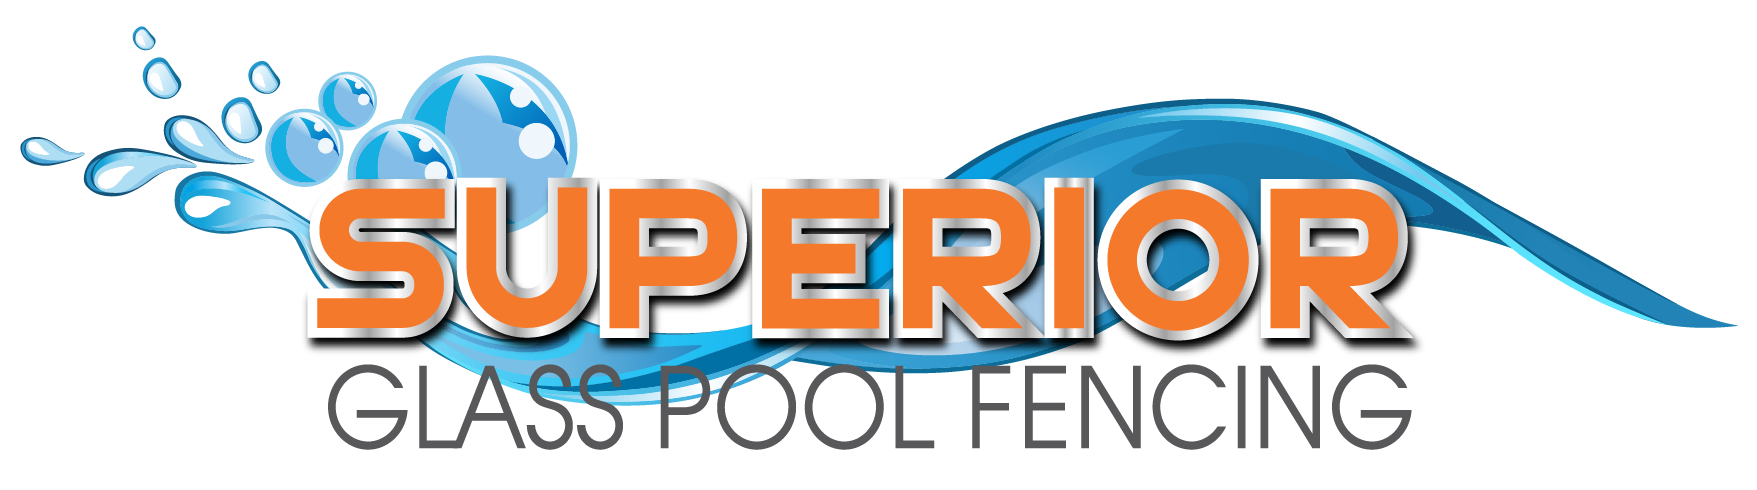 Superior Glass Pool Fencing